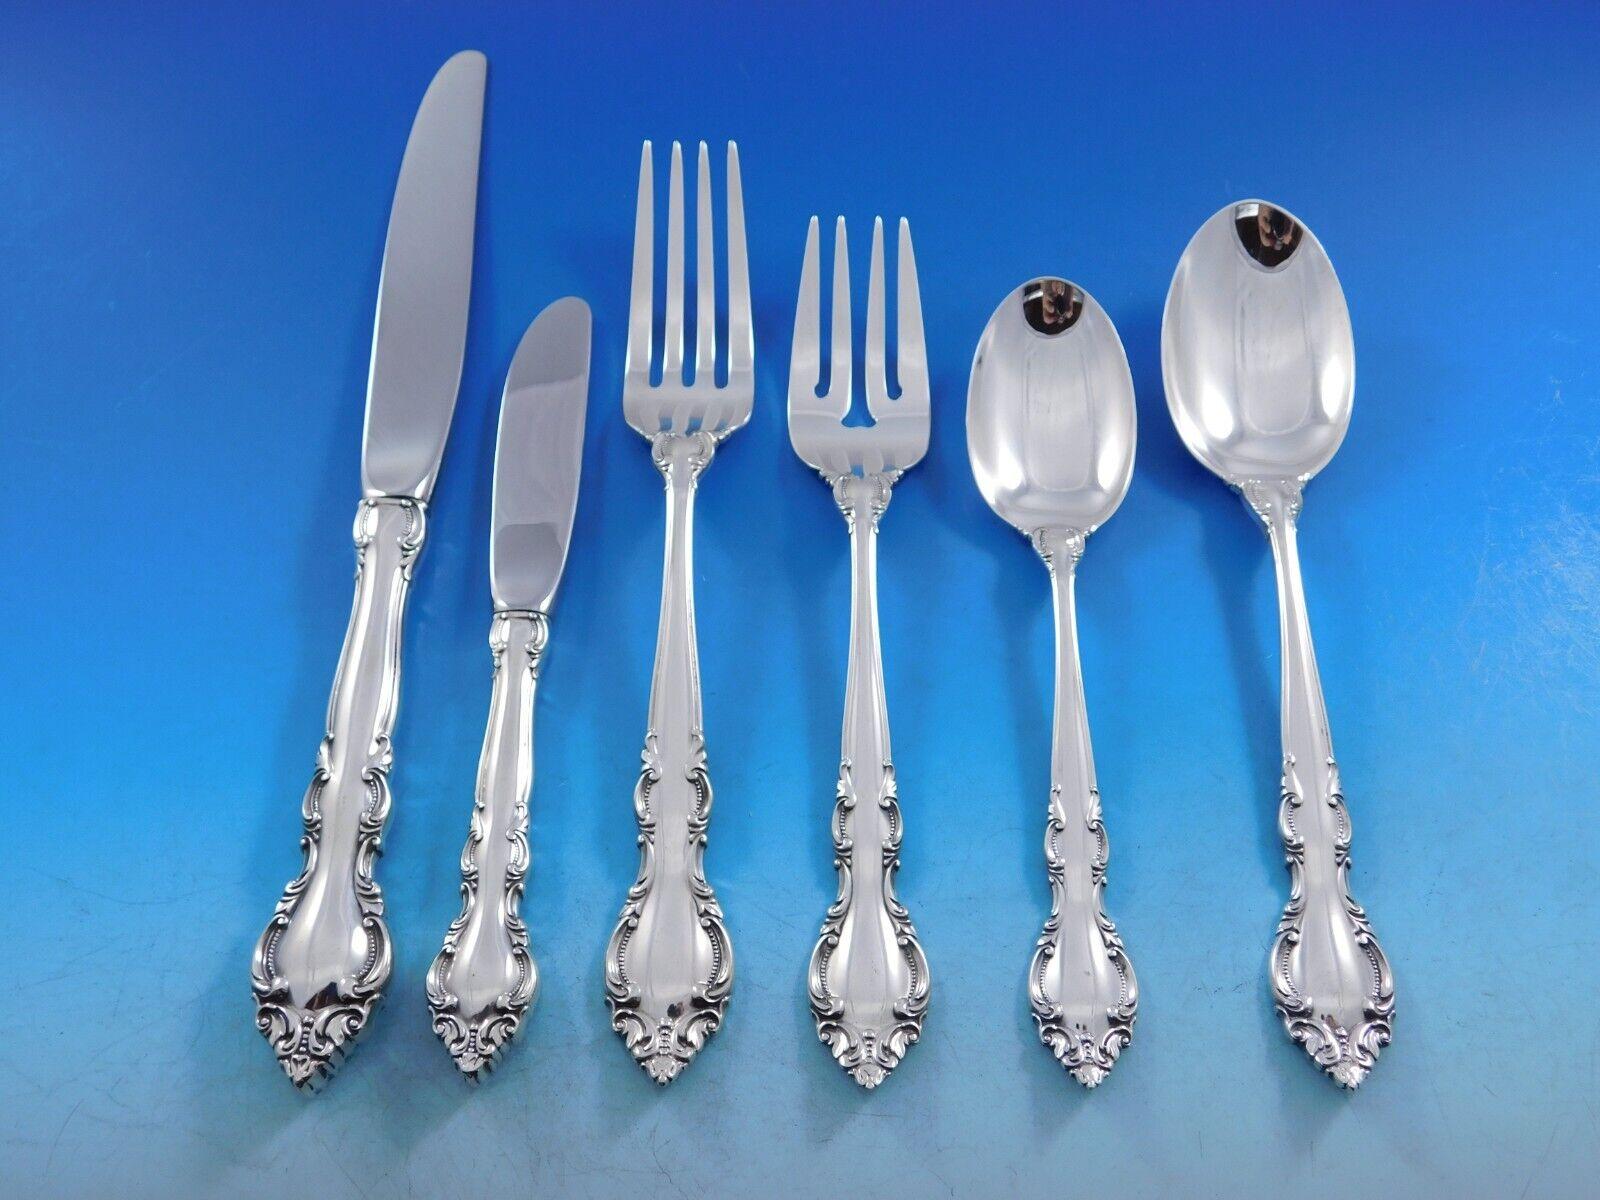 Gorgeous Malvern by Lunt sterling silver Flatware set - 48 pieces. This set includes:

12 Knives, 8 3/4